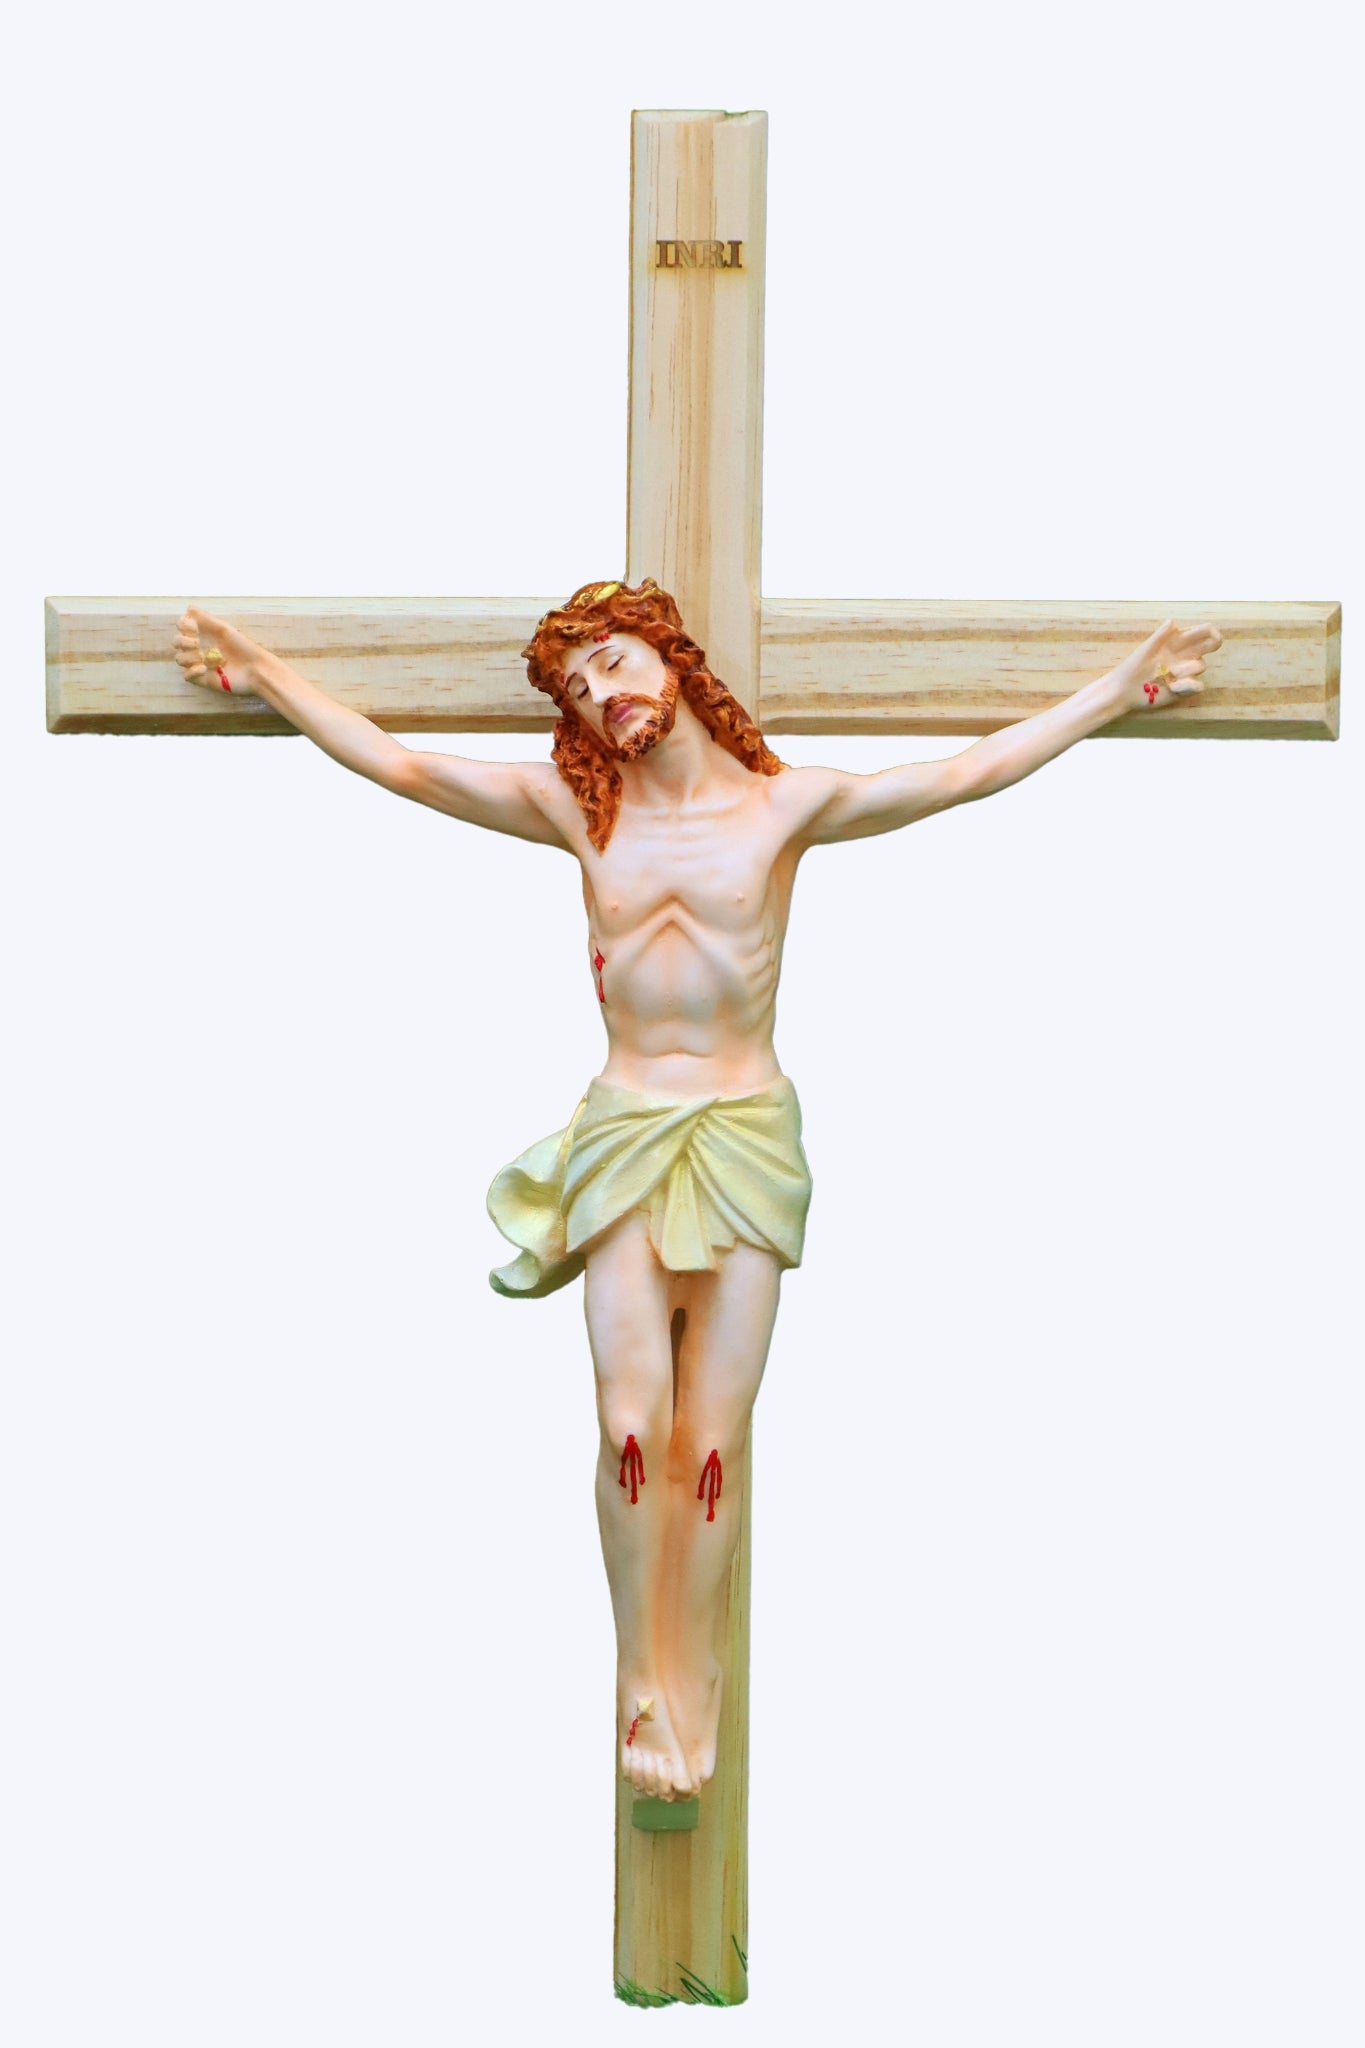 Crucifix 18 Inch Statue - Made of Polymarble | Shop Now